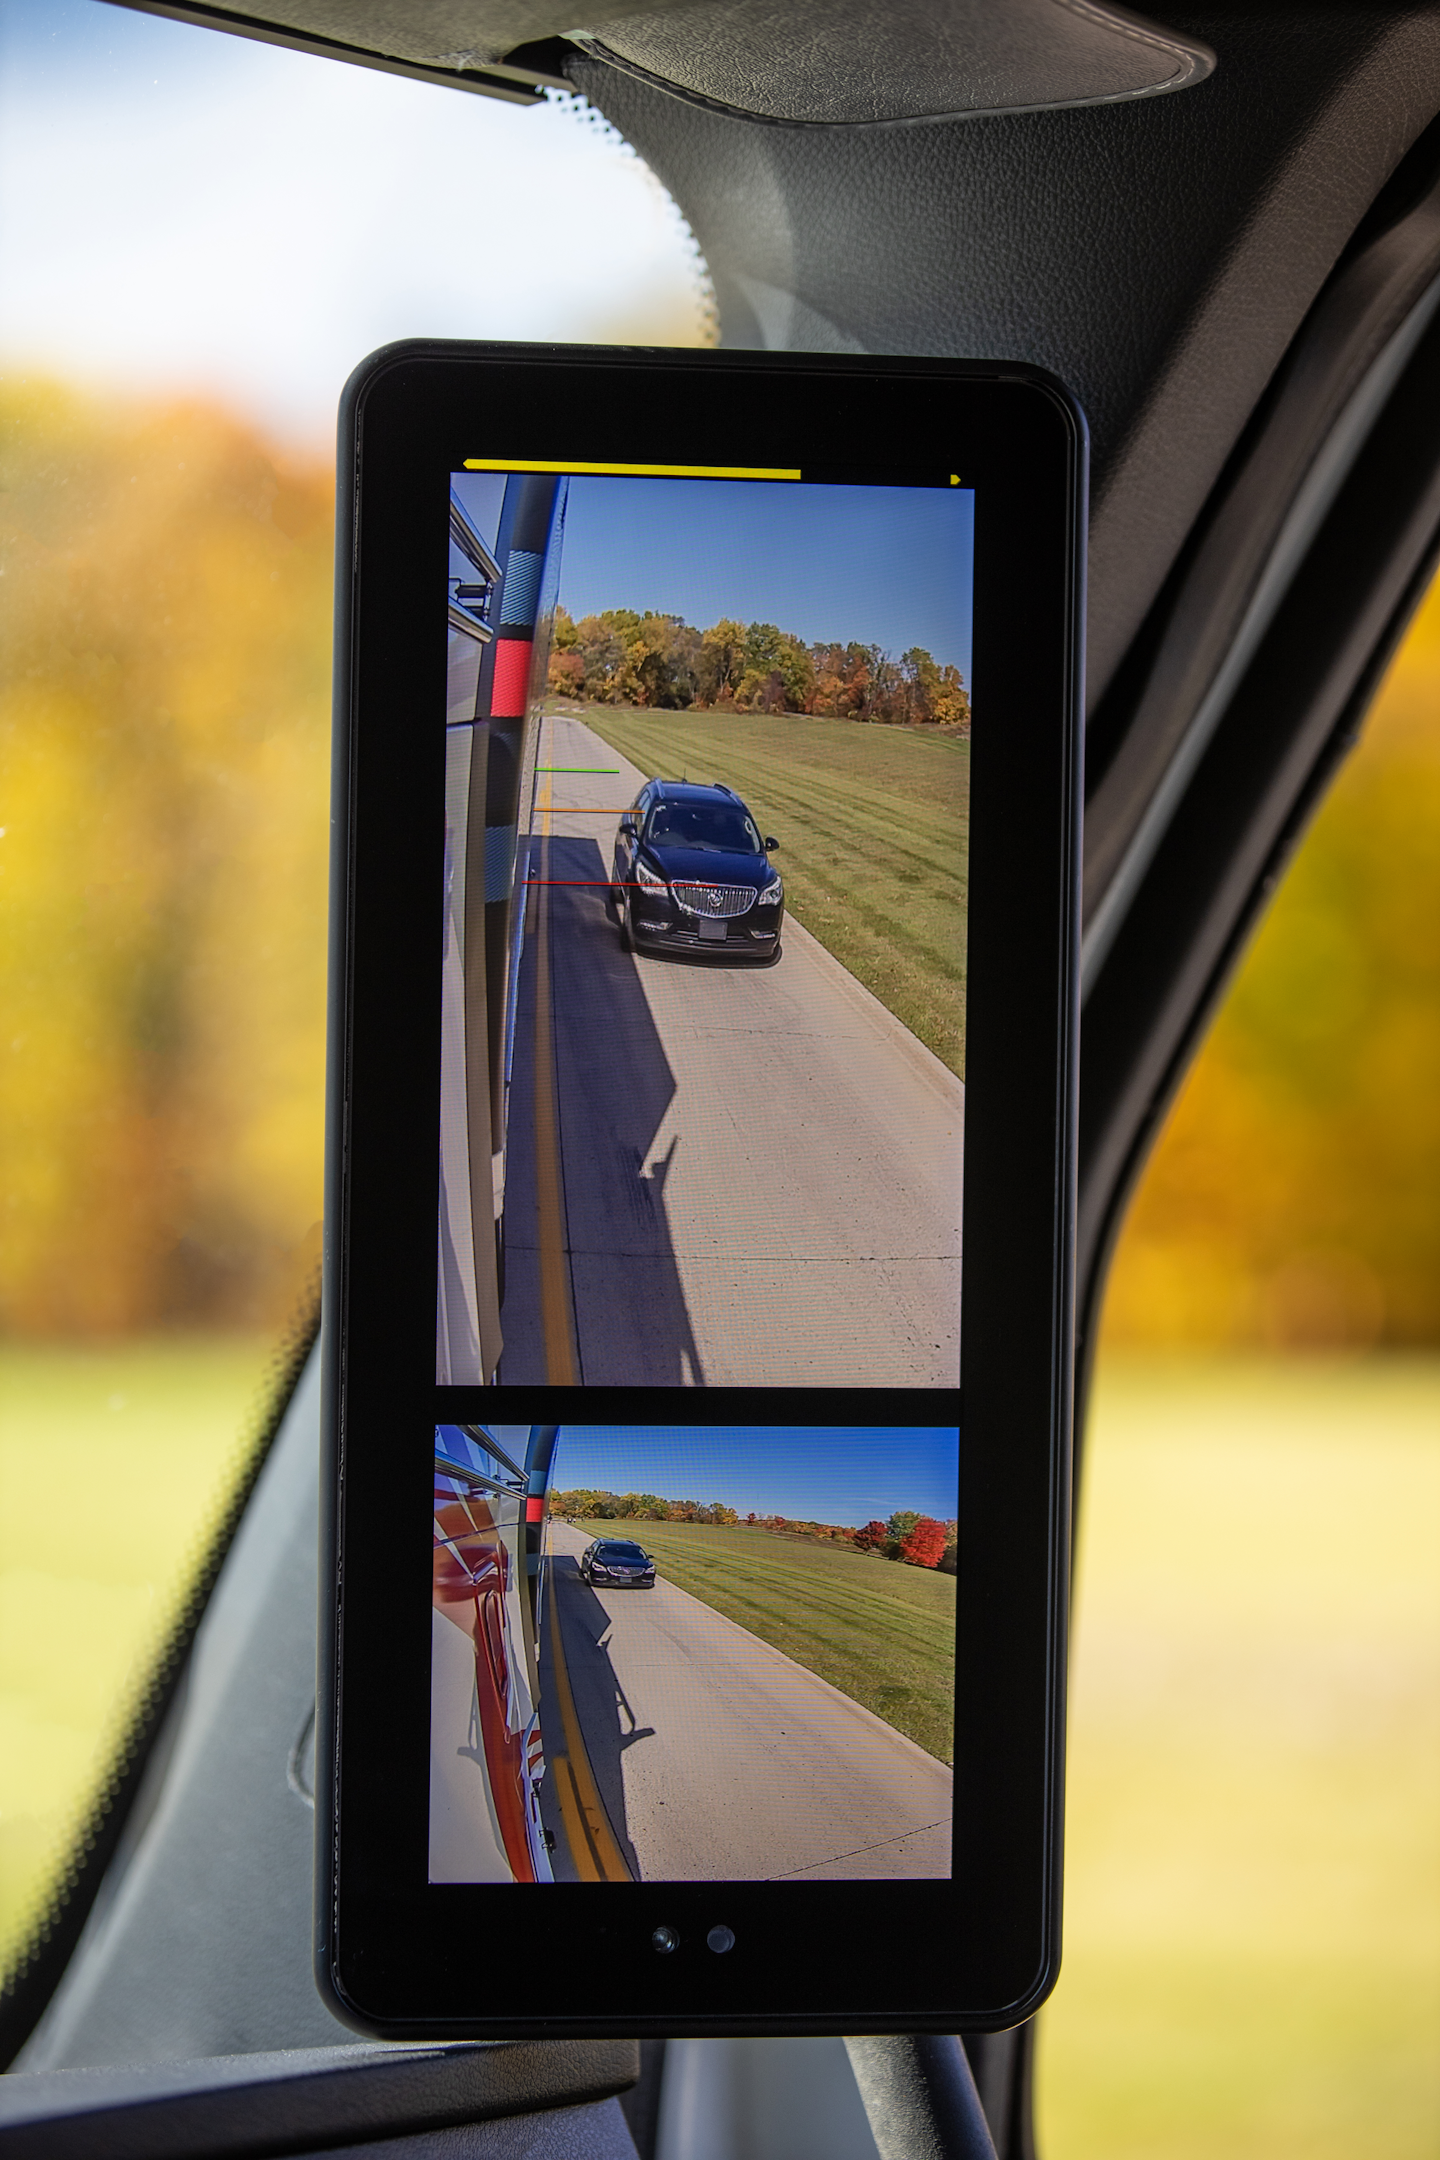 MirrorEye monitors inside the cab mimic conventional truck mirrors but provide a much better view around the tractor which eliminates blind spots.